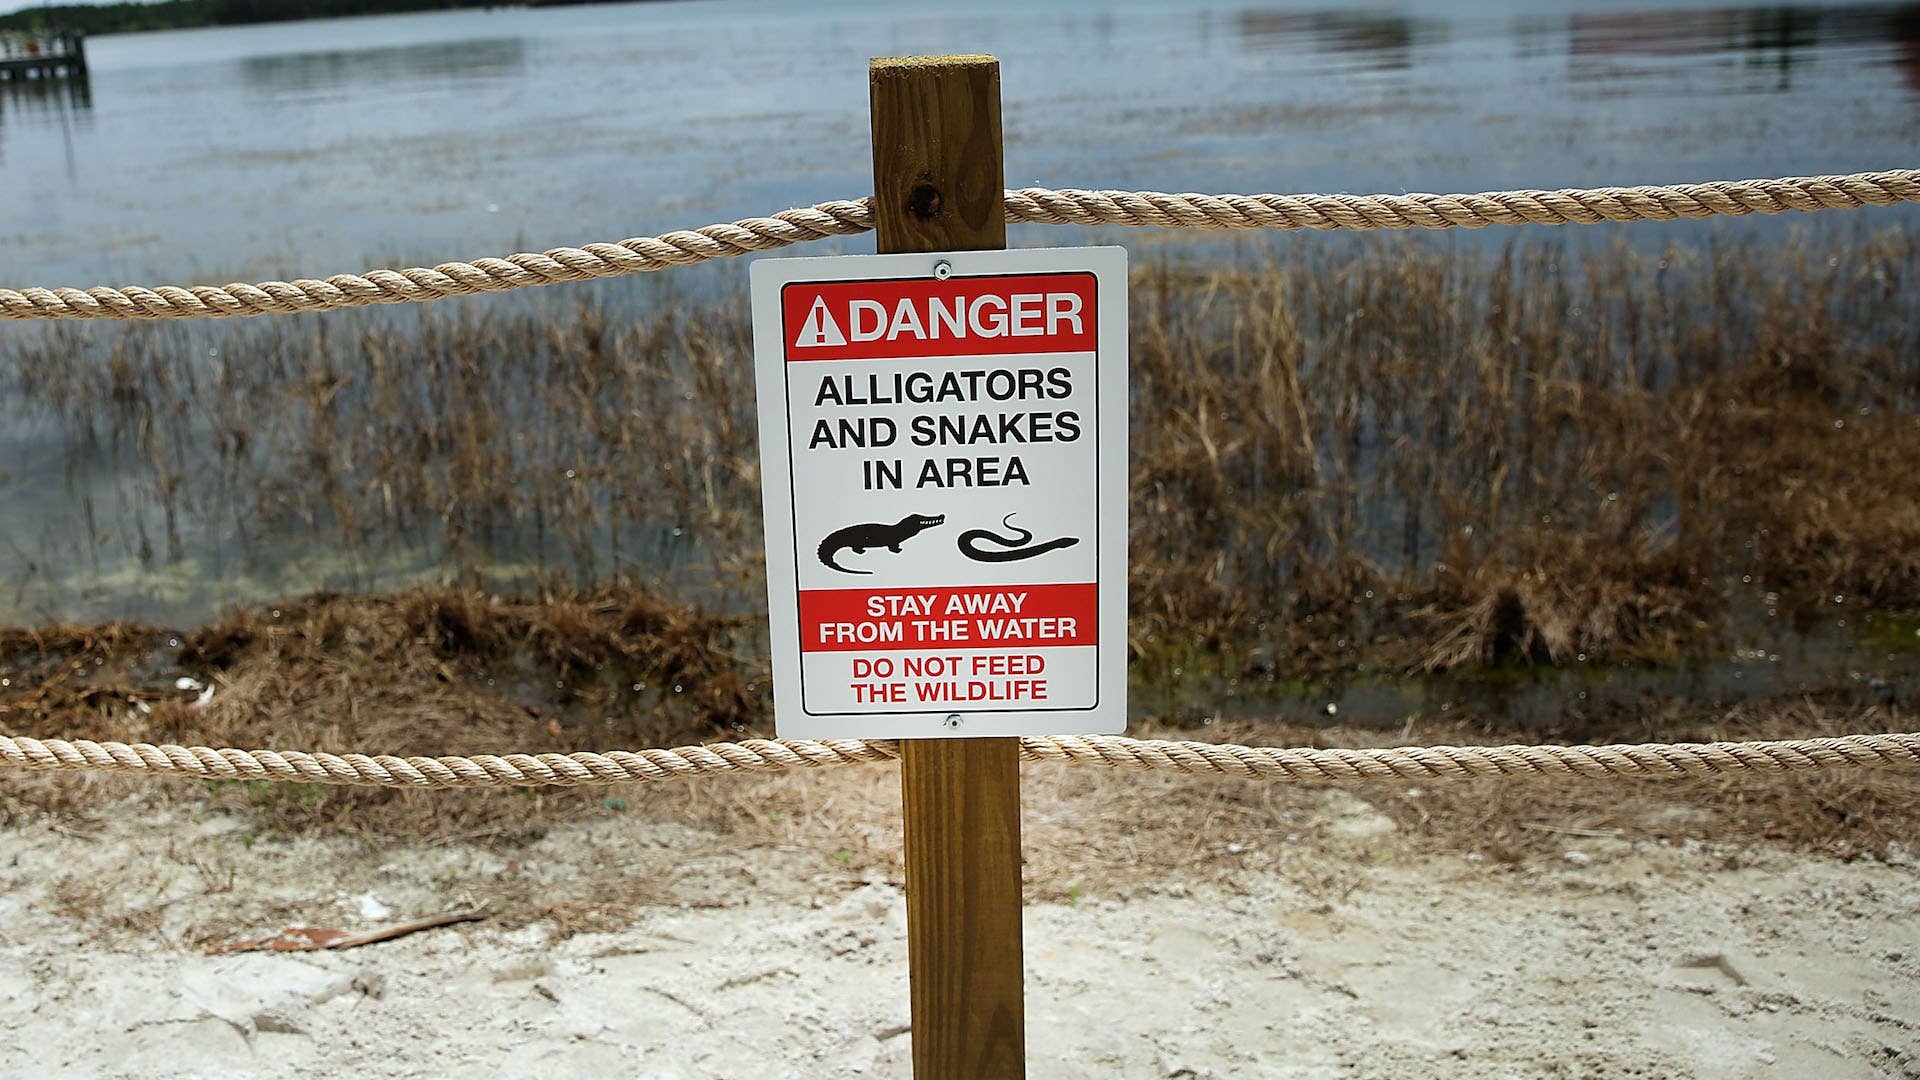 Newly installed signs warn of alligators and snakes